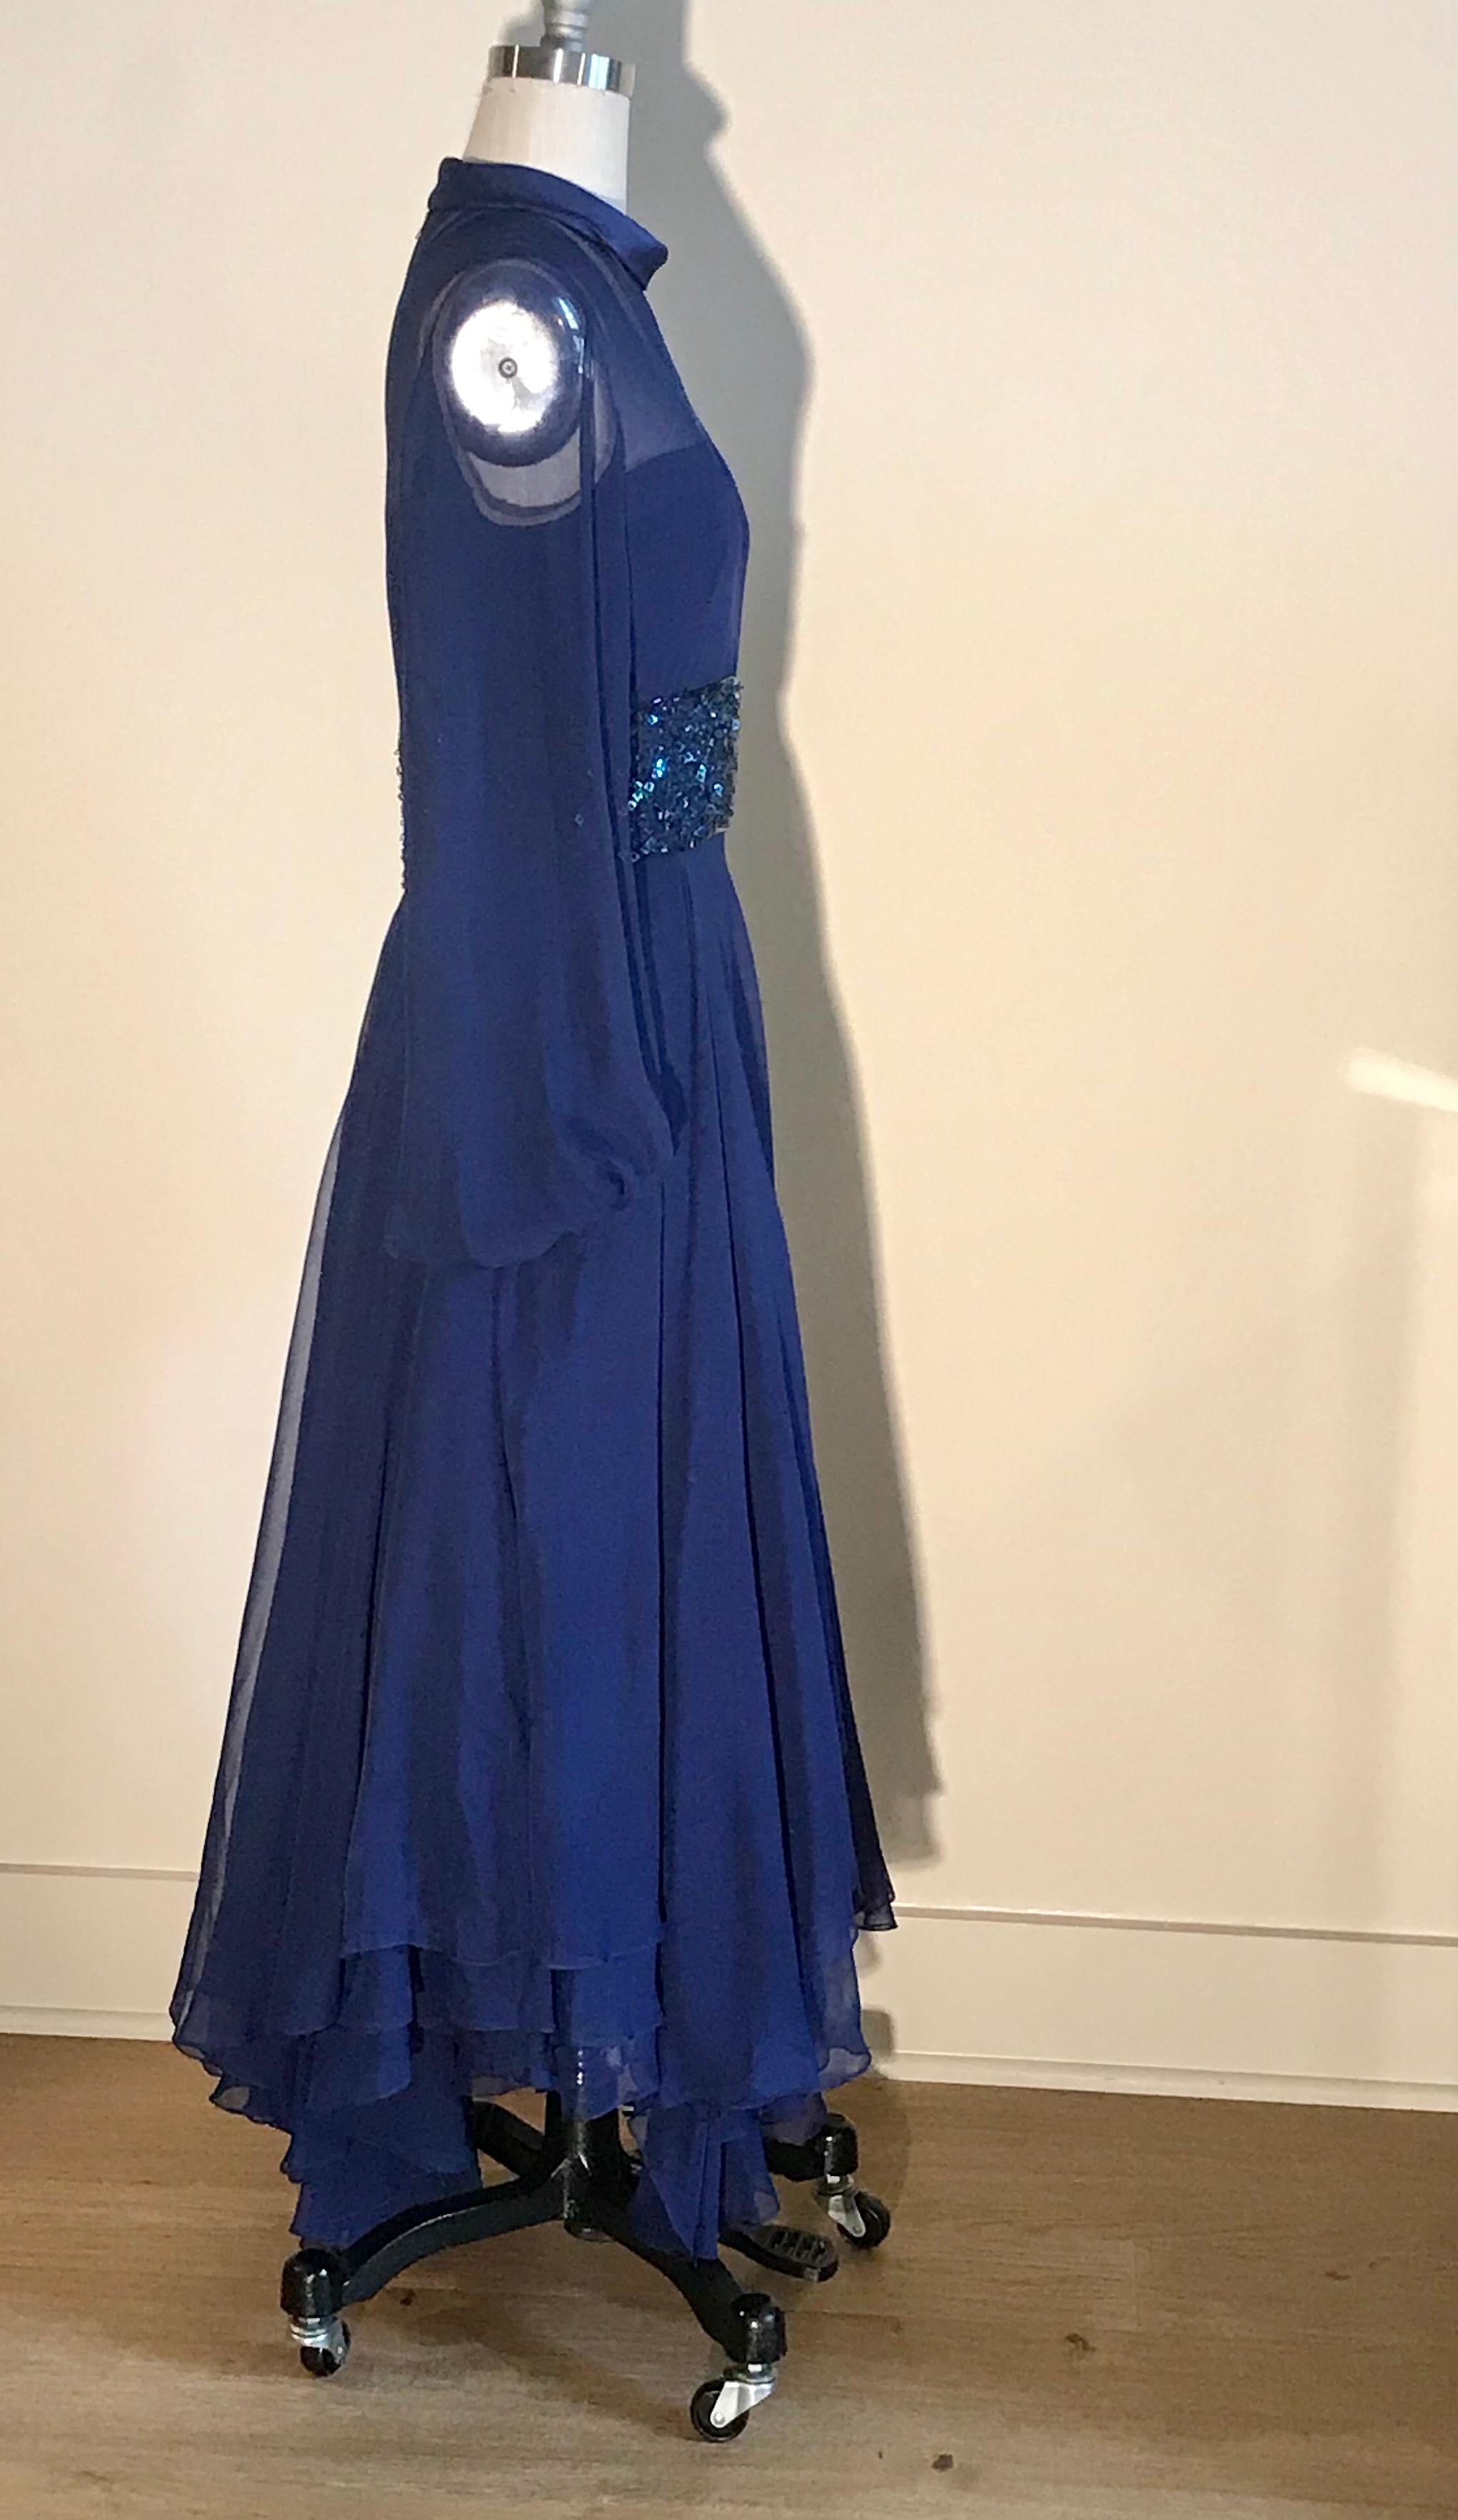 William Travilla vintage cobalt blue dress (estimated 1970s) featuring sheer detailing and beaded embellishment at waist. Amazing layered skirt has tons of movement. Wide sheer sleeves are banded at wrist to create volume. Nude lining at top. Back